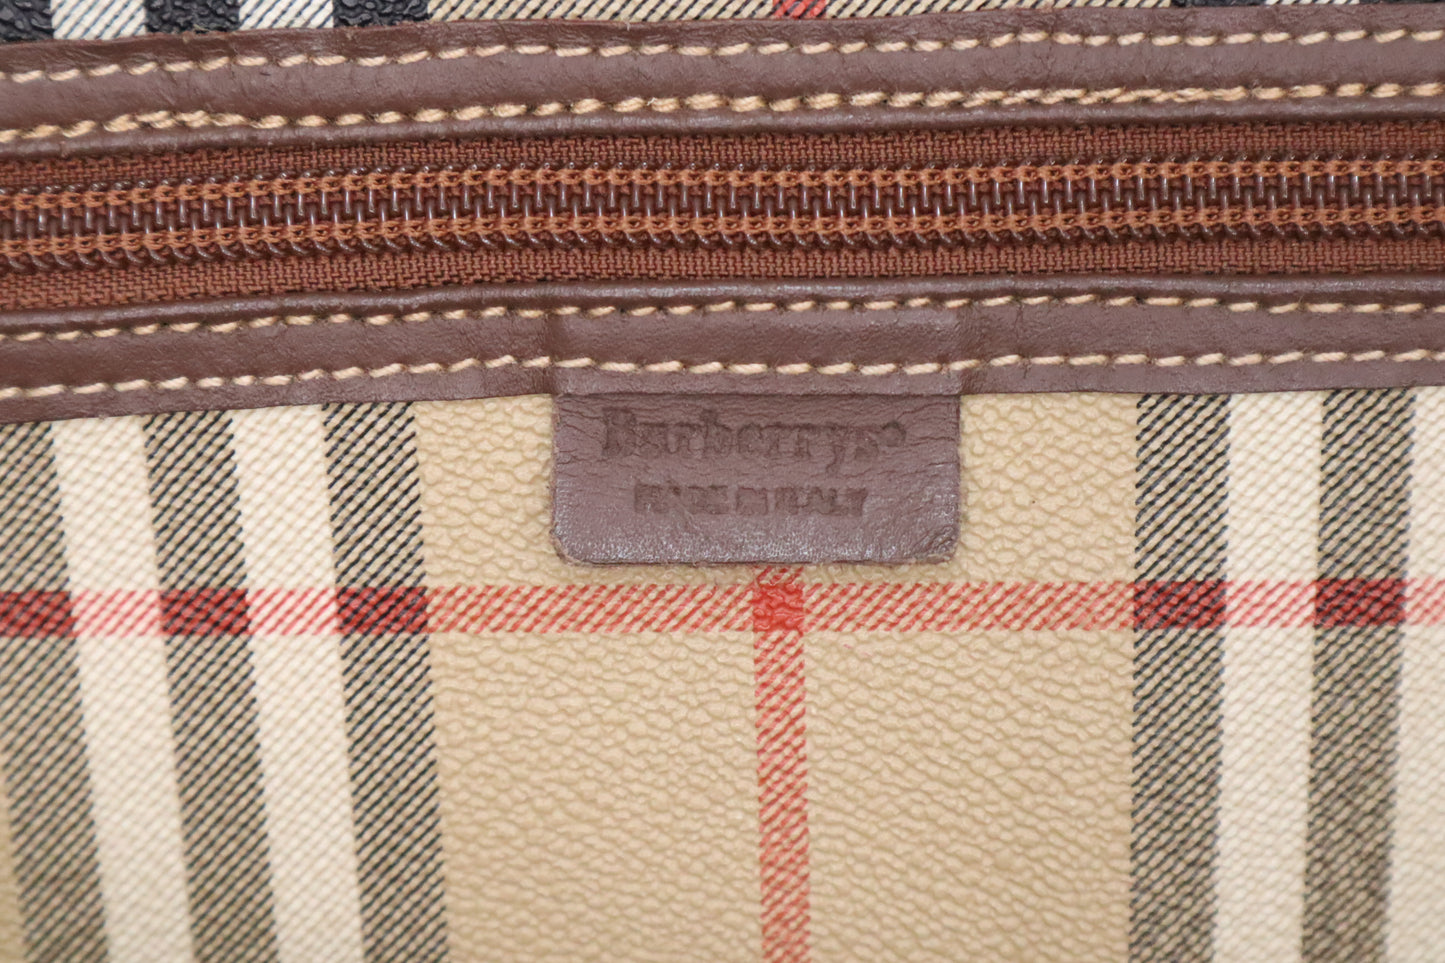 Burberry Travel Bag in Beige Check Coated Canvas